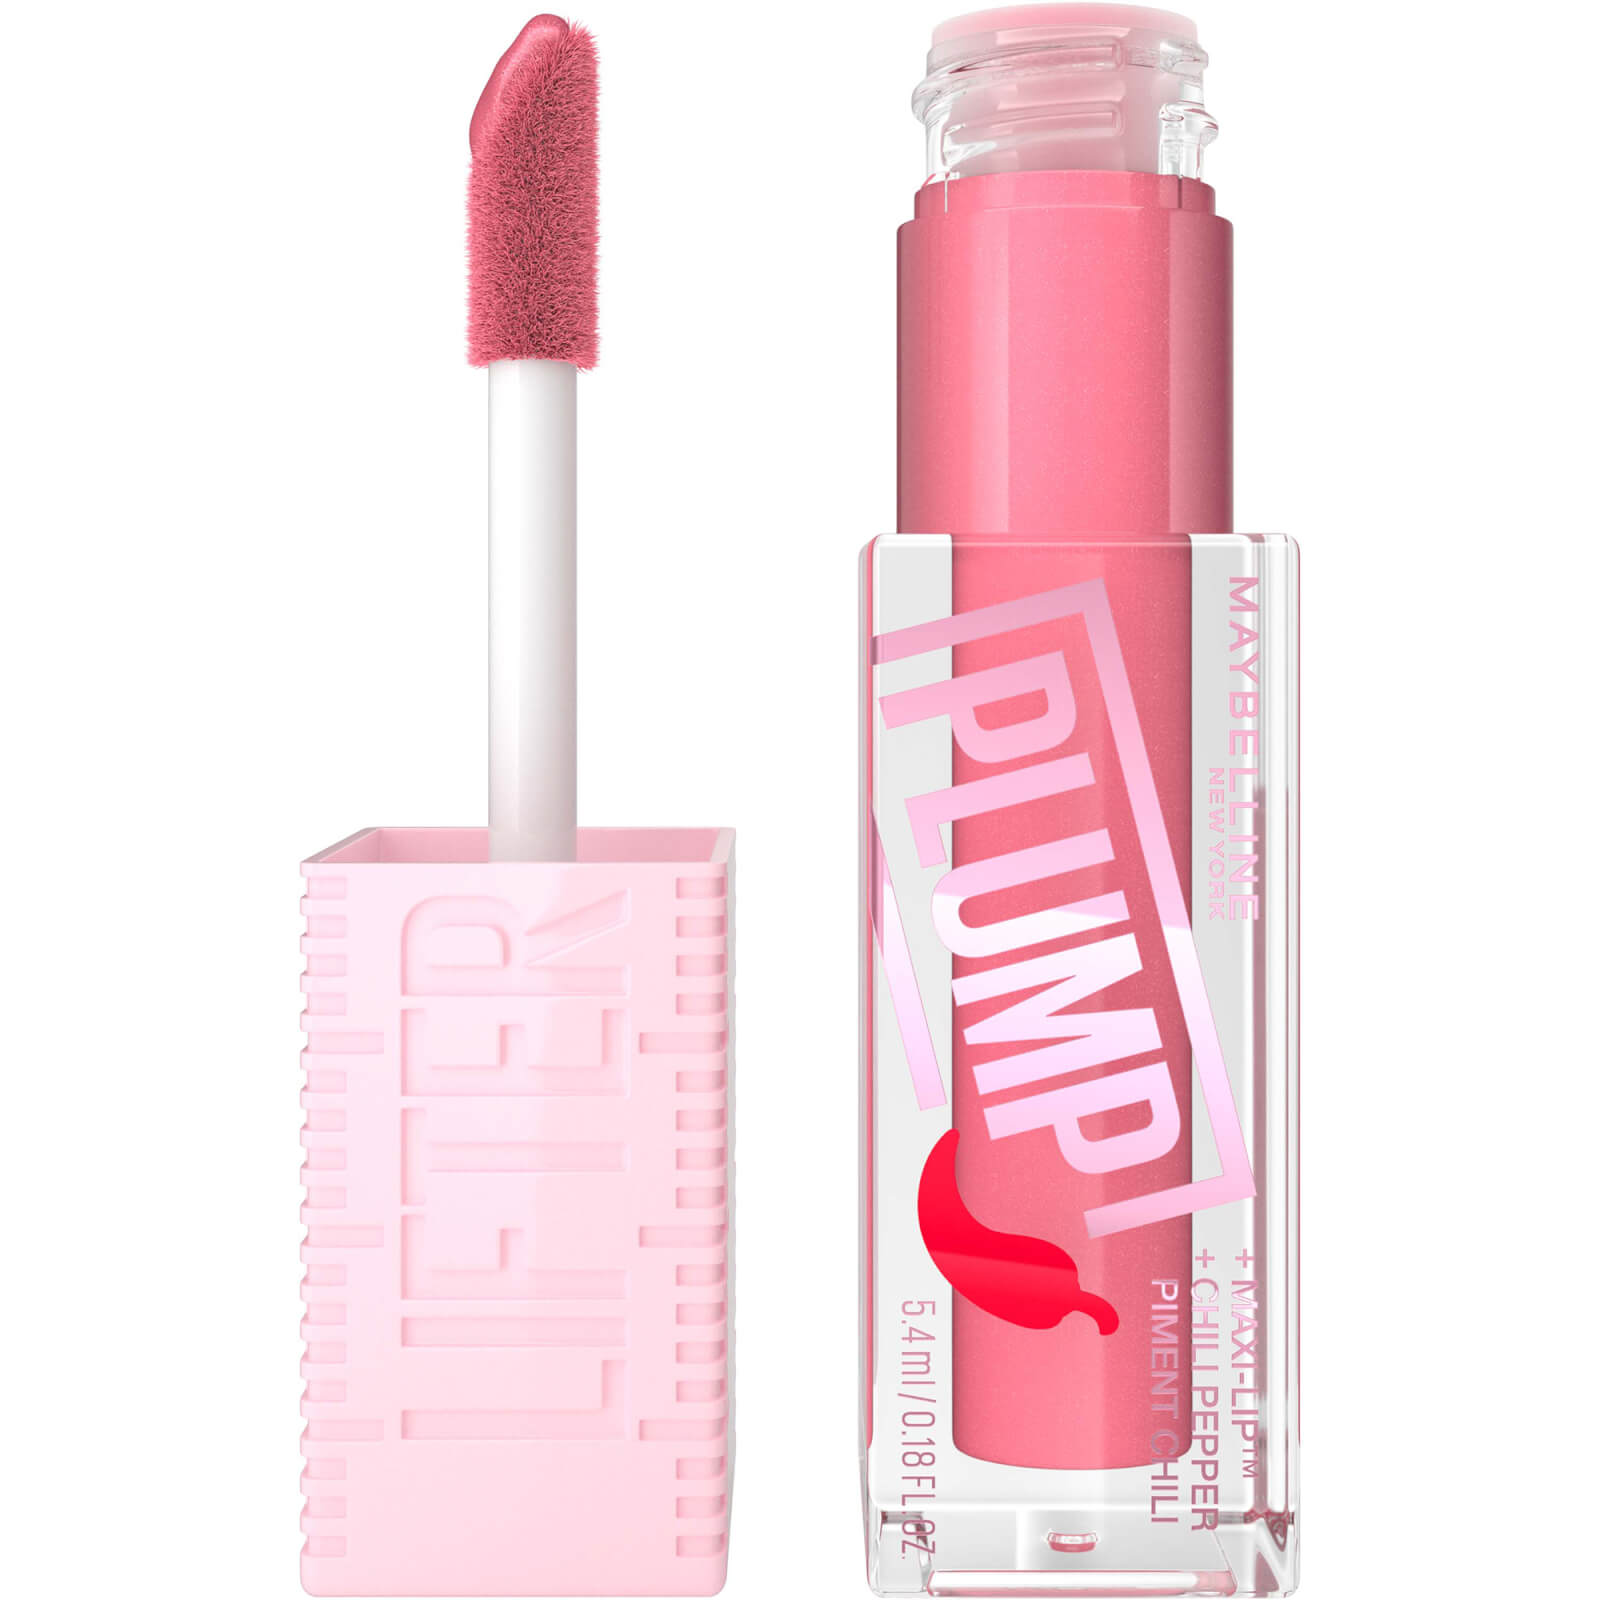 Maybelline Lifter Gloss Plumping Lip Gloss Lasting Hydration Formula With Hyaluronic Acid and Chilli